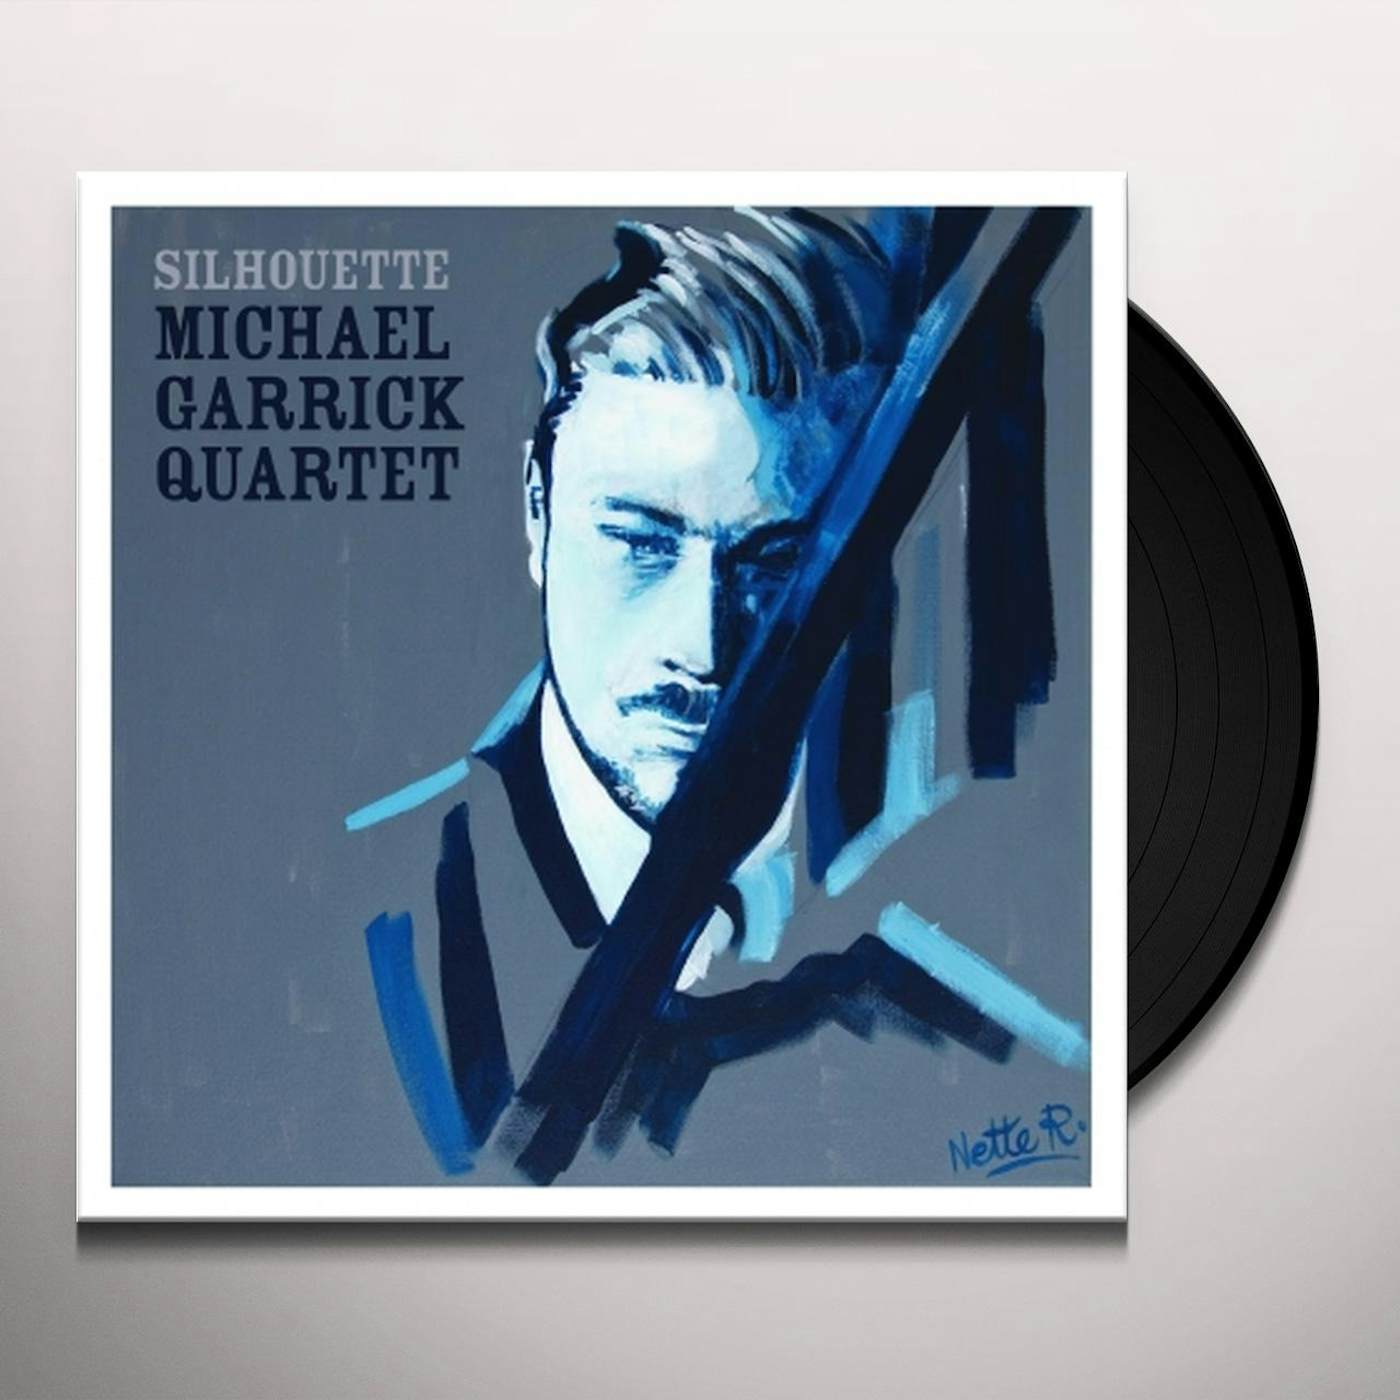 Michael Garrick SILHOUETTE (LIVE AT THE MUSIC ROOM 1958) Vinyl Record - Spain Release